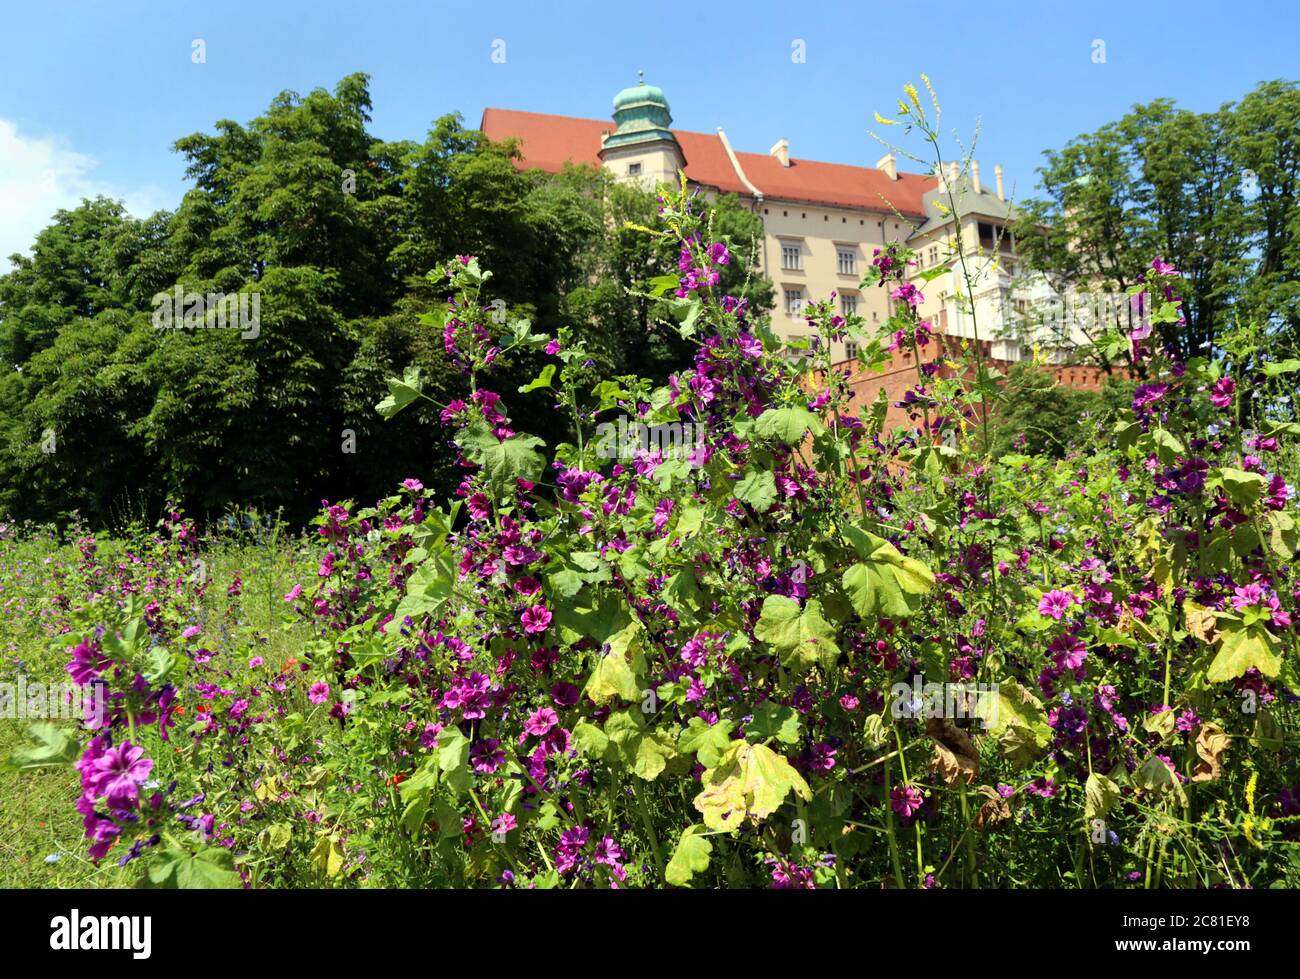 Cracow. Krakow. Poland. Wild flower meadow lawn in front of Wawel royal castle. Stock Photo